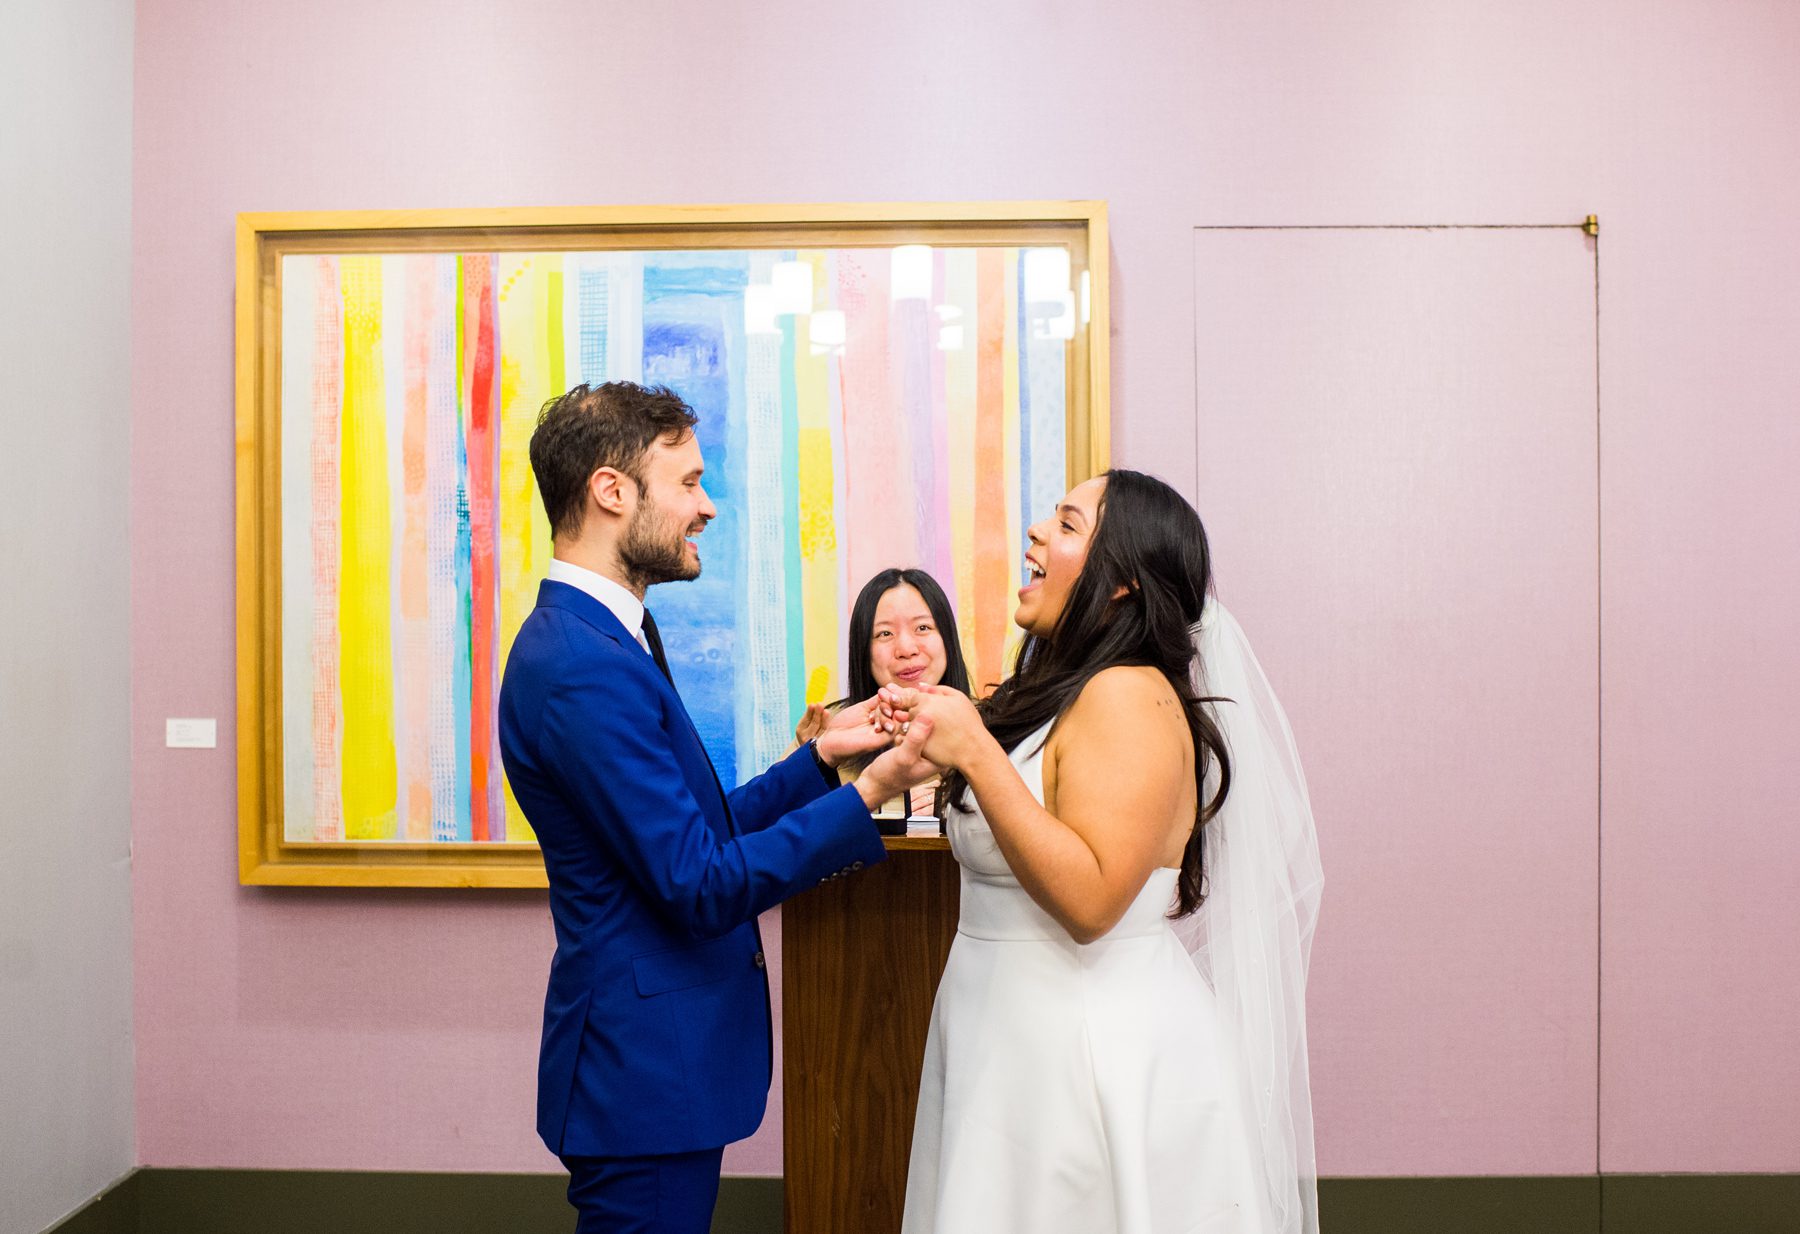 Couple Getting Married at City Hall in NYC